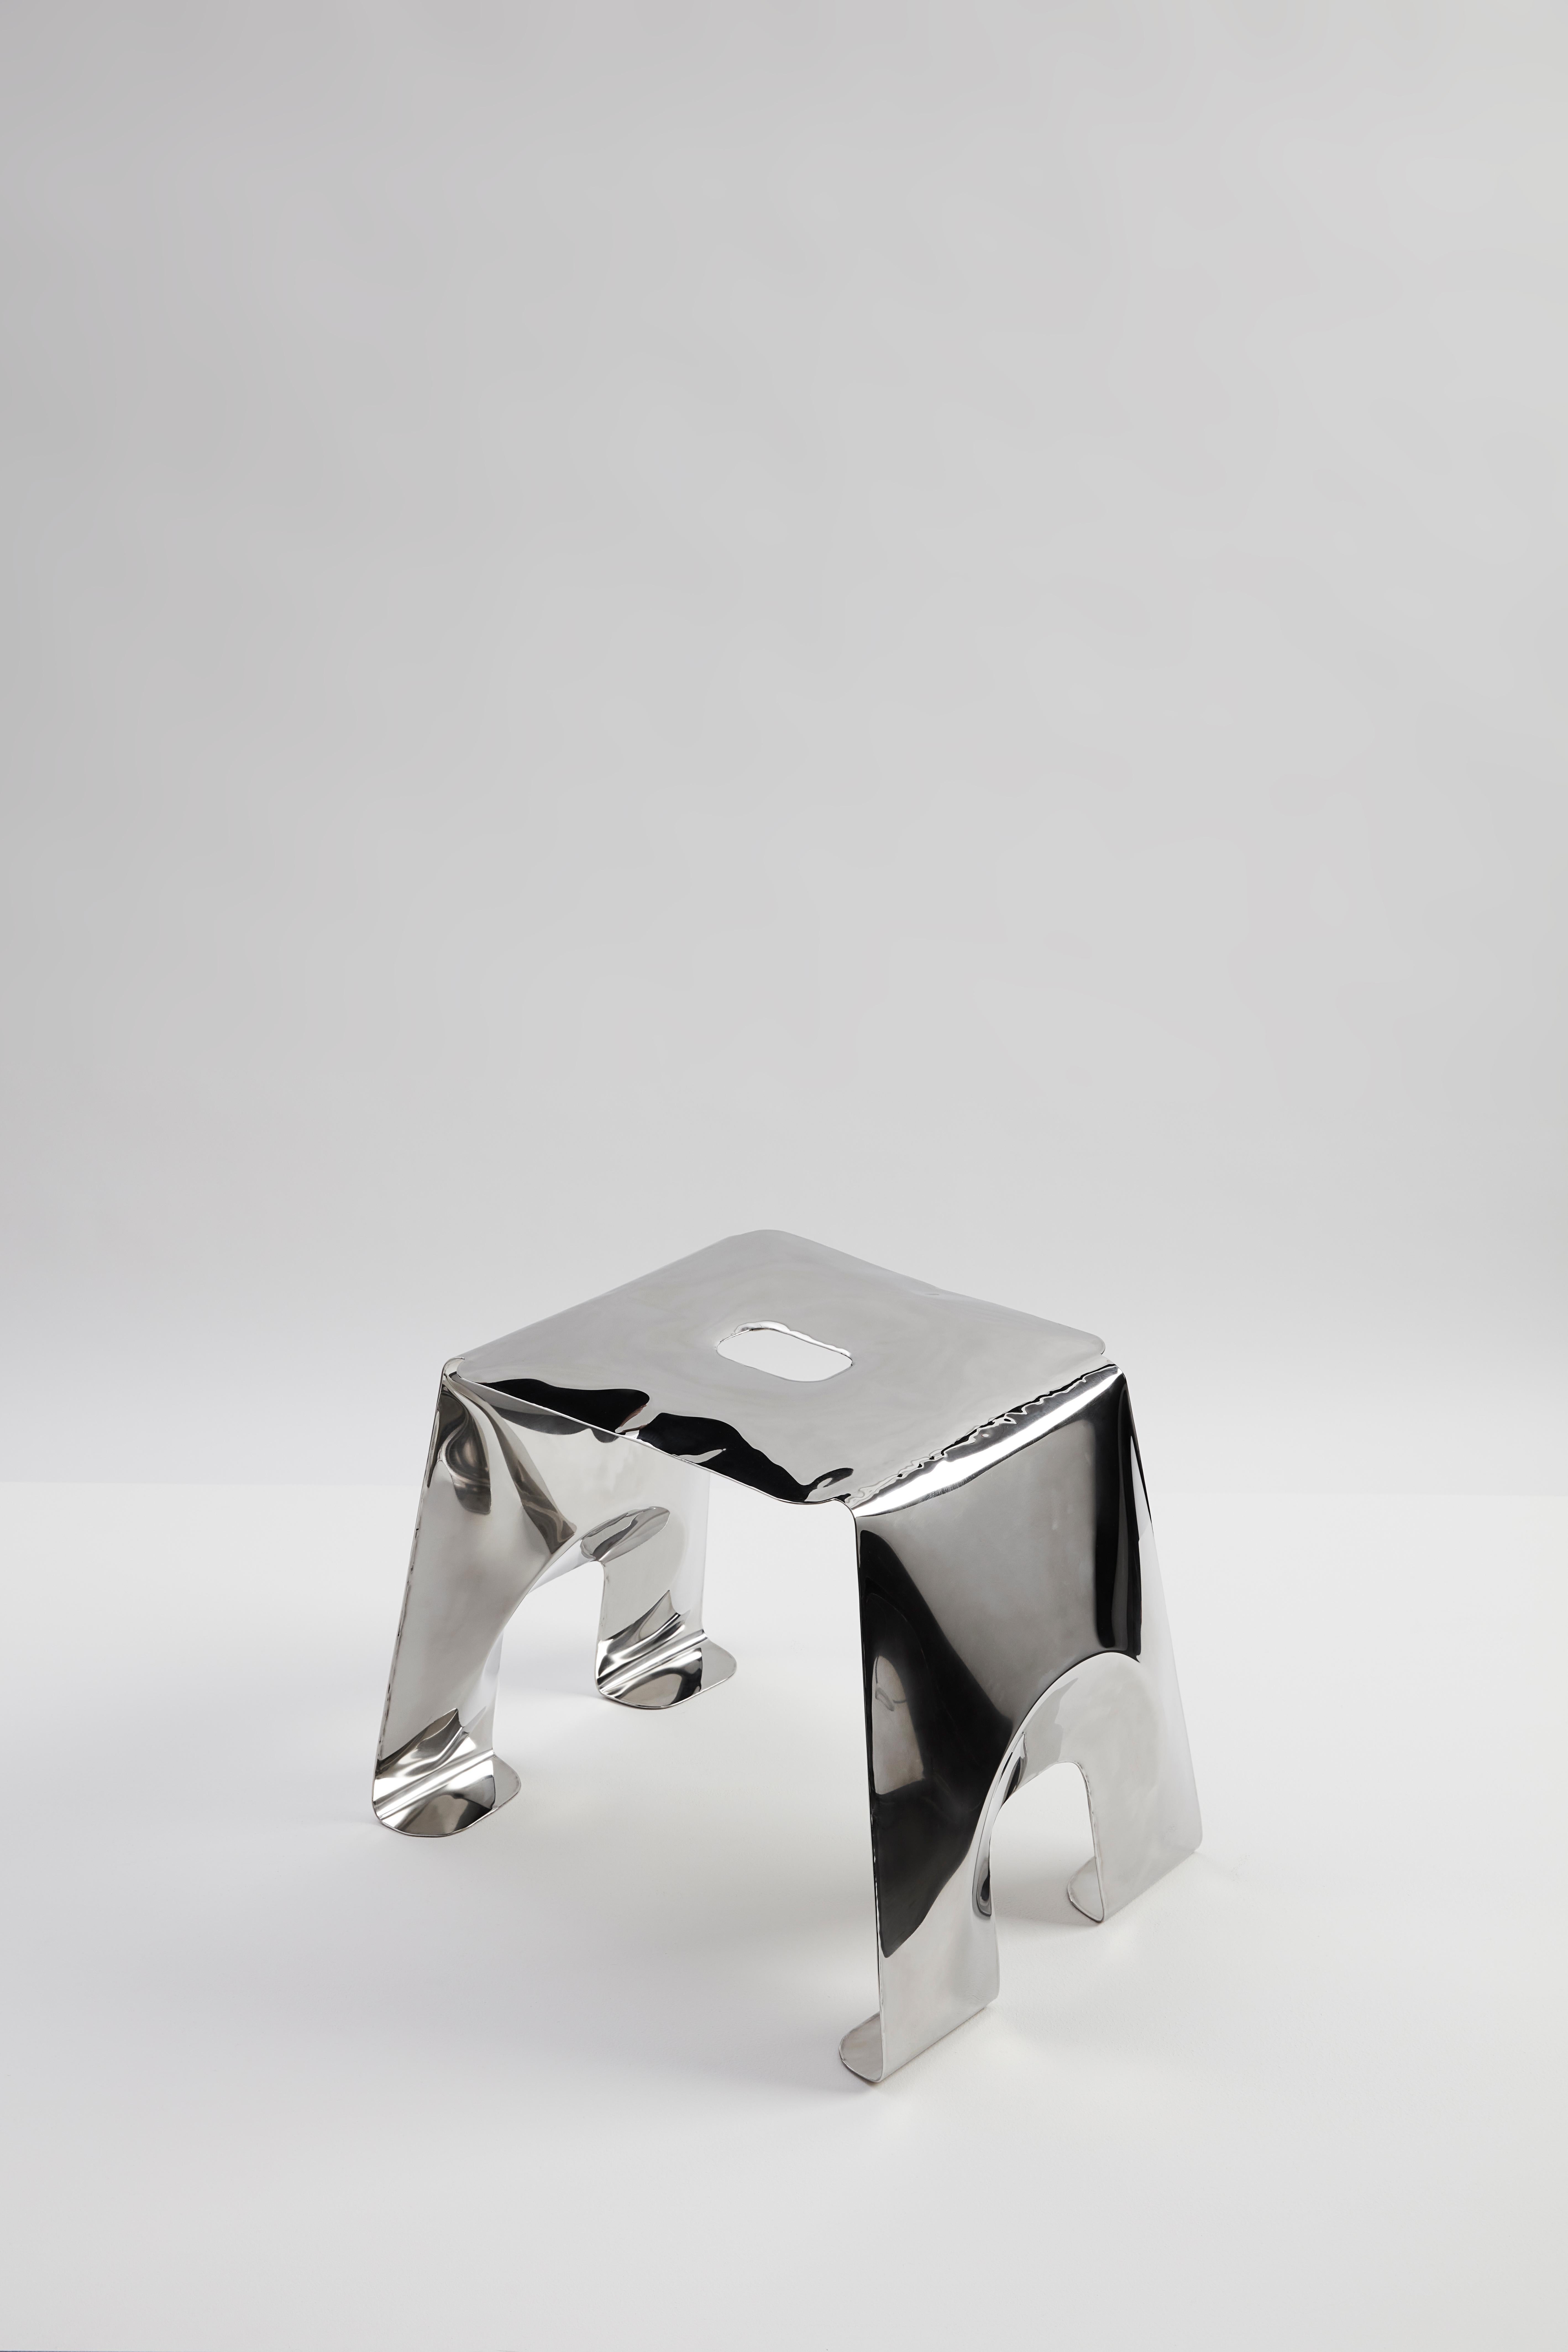 Product: A Stool
Colours: Mirror polished effect/or Satin finish
Materials: Polished Stainless Steel/ or Mild Steel
Dimensions: (H) 43cm x (W) 53cm x (D) 41cm

The a stool is a study in the process of hydroforming.

Two sheets of metal are welded